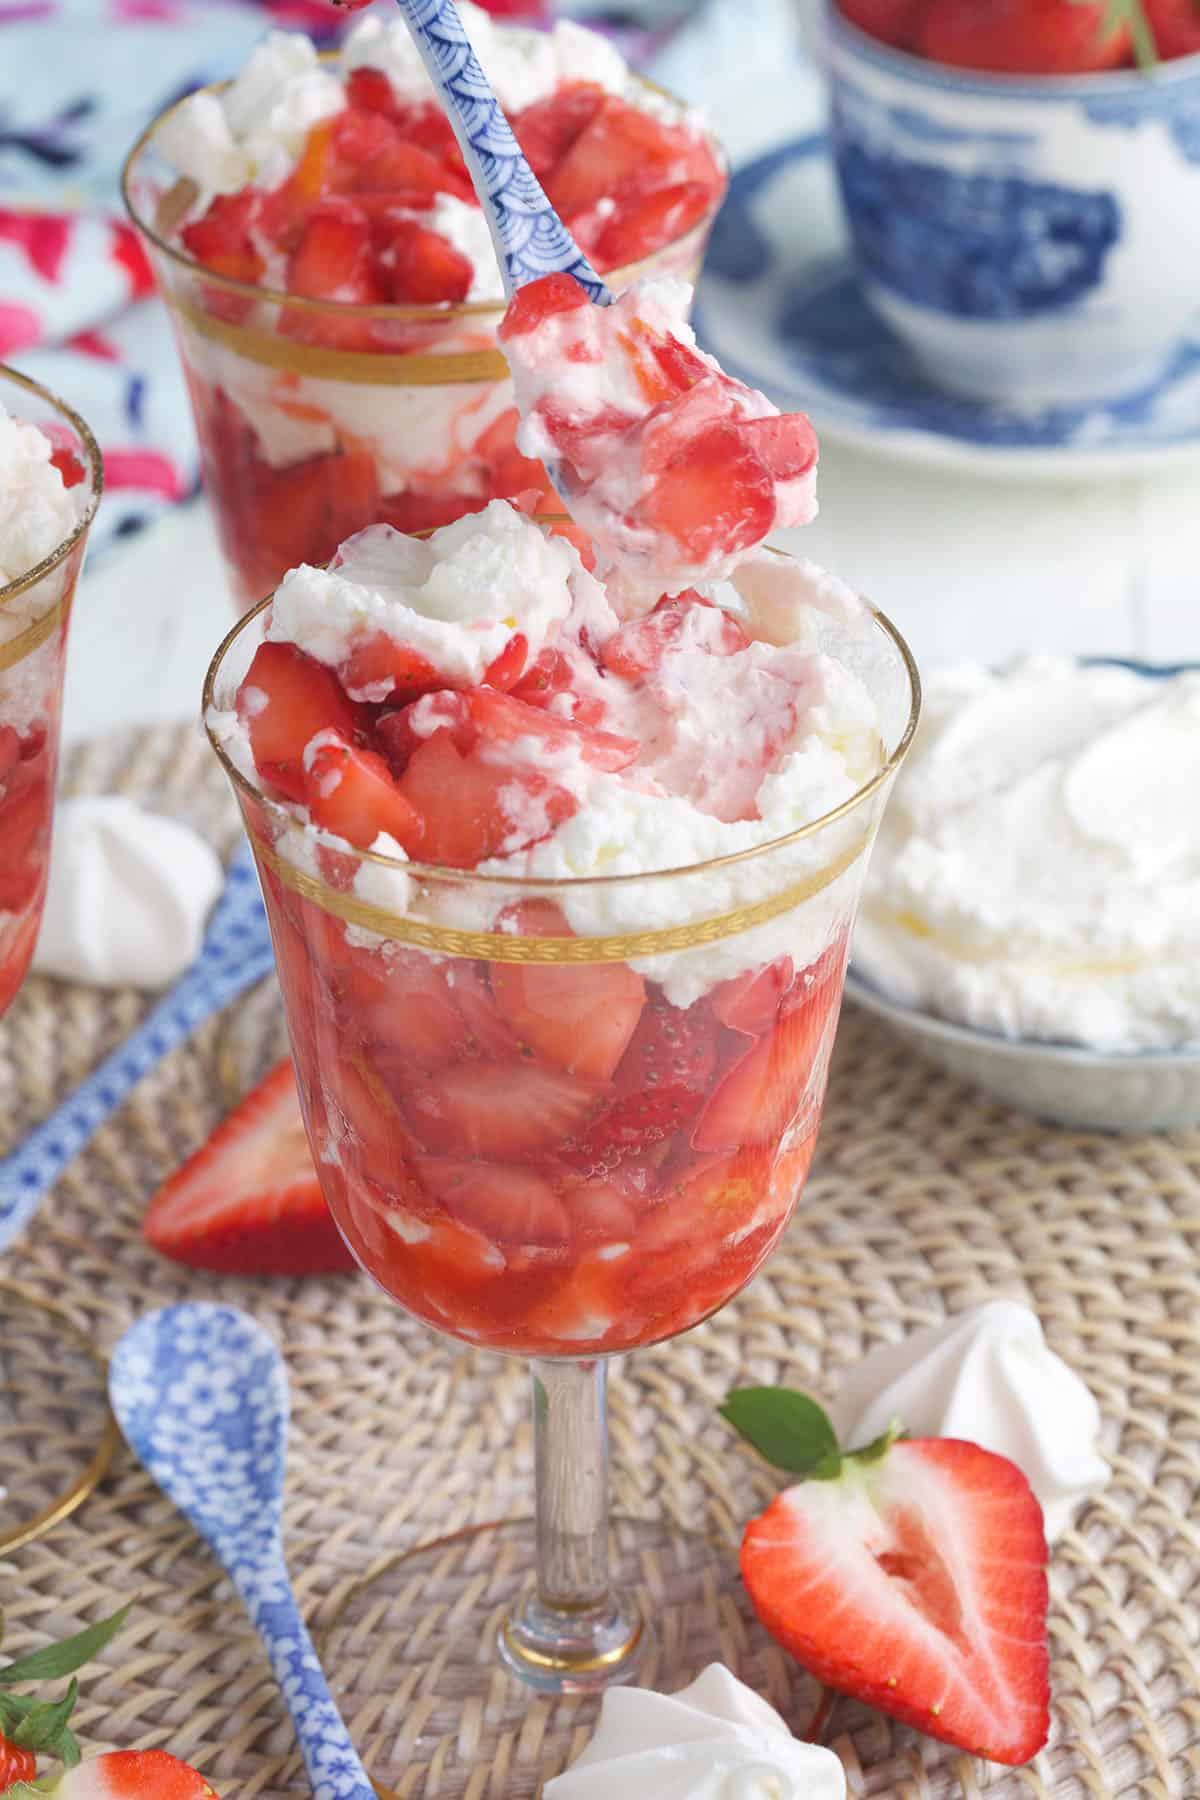 Eton mess is presented in a glass. 